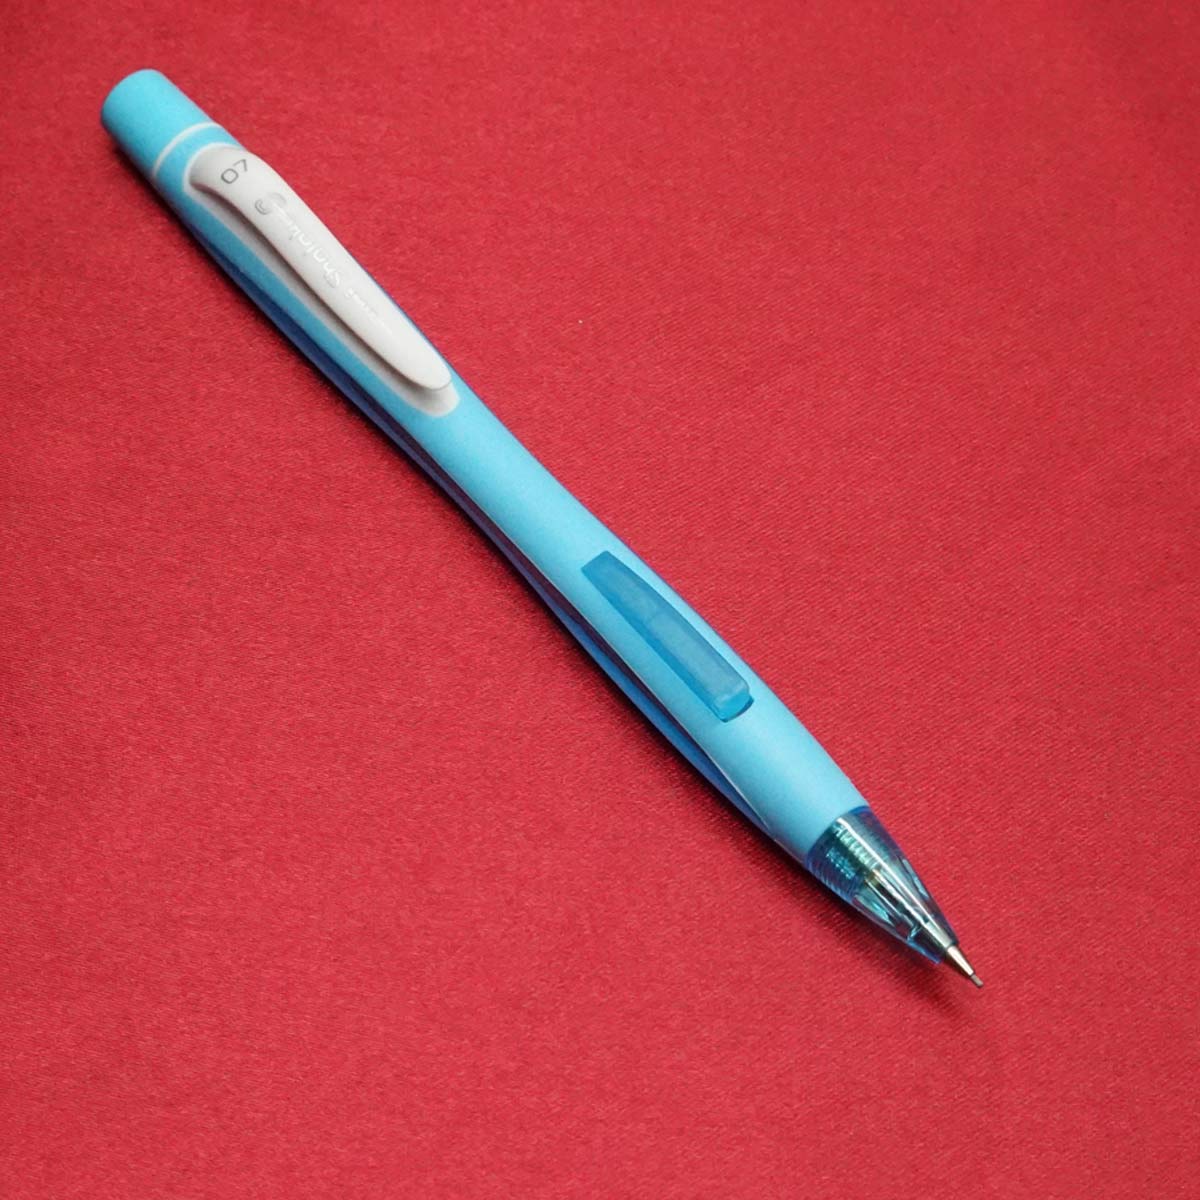 Uniball Shalaku Skyblue Color Body With 0.7mm Tip Front Click Type Led Pencil SKU 21377